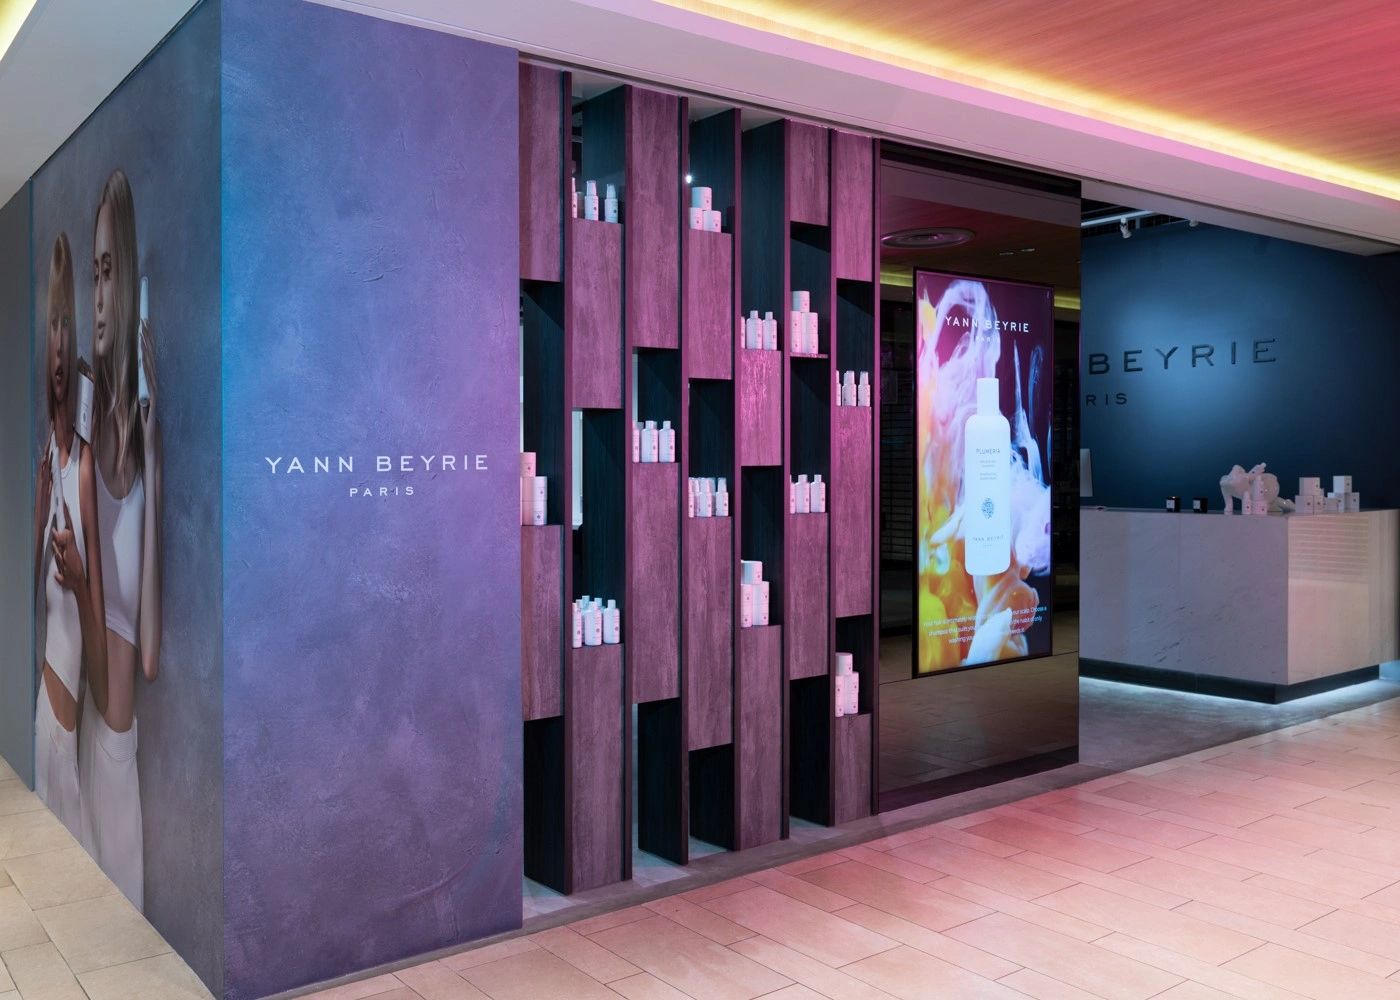 The frontage of Yann Beyrie Salon